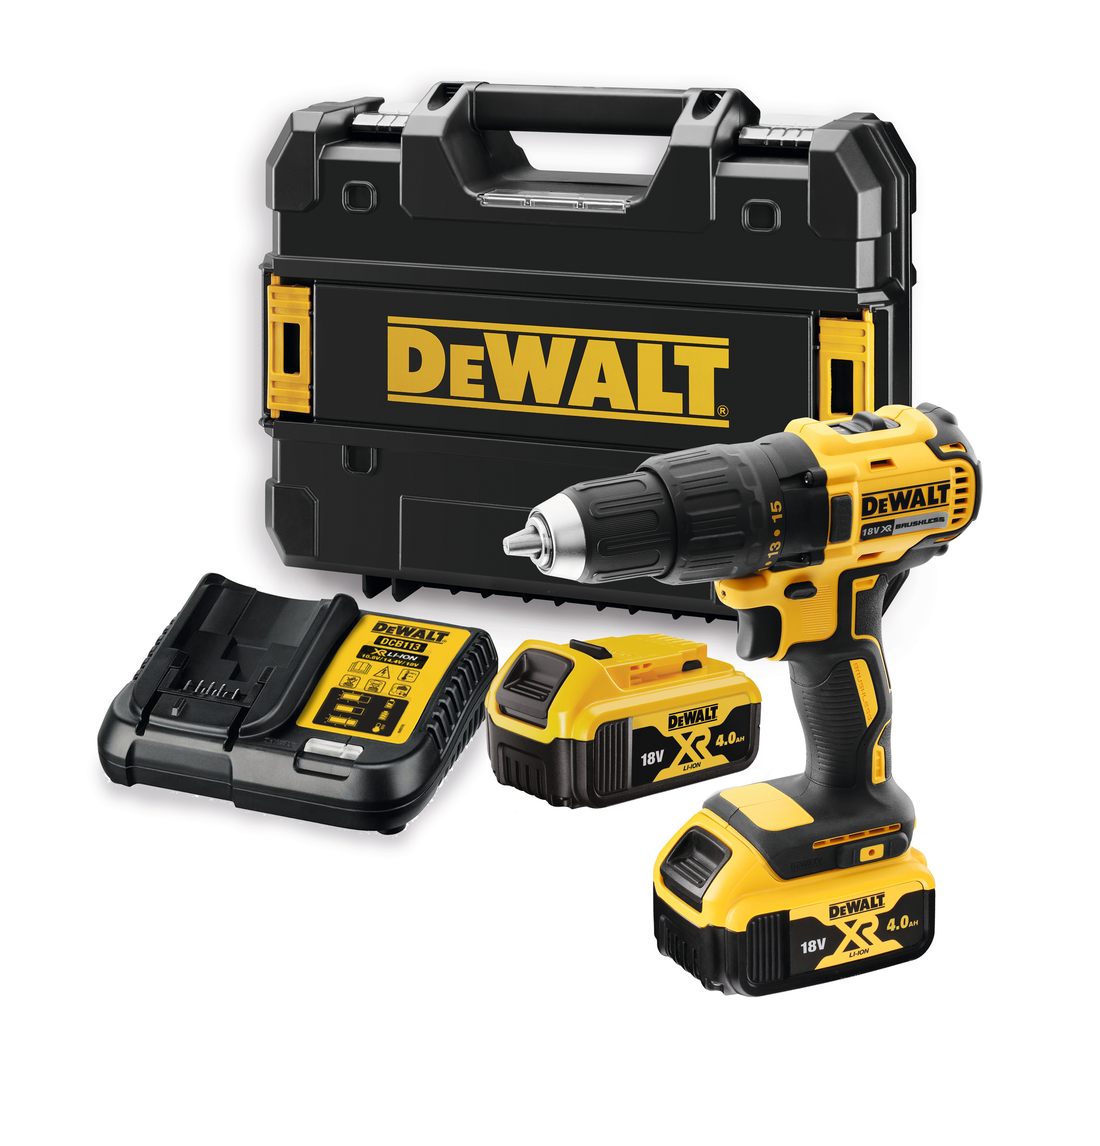 POWER DRILL DEWALT BRUSHLESS WITH 2 BATTERIES 4AH WITH 30-PIECE SET - best price from Maltashopper.com BR400003580